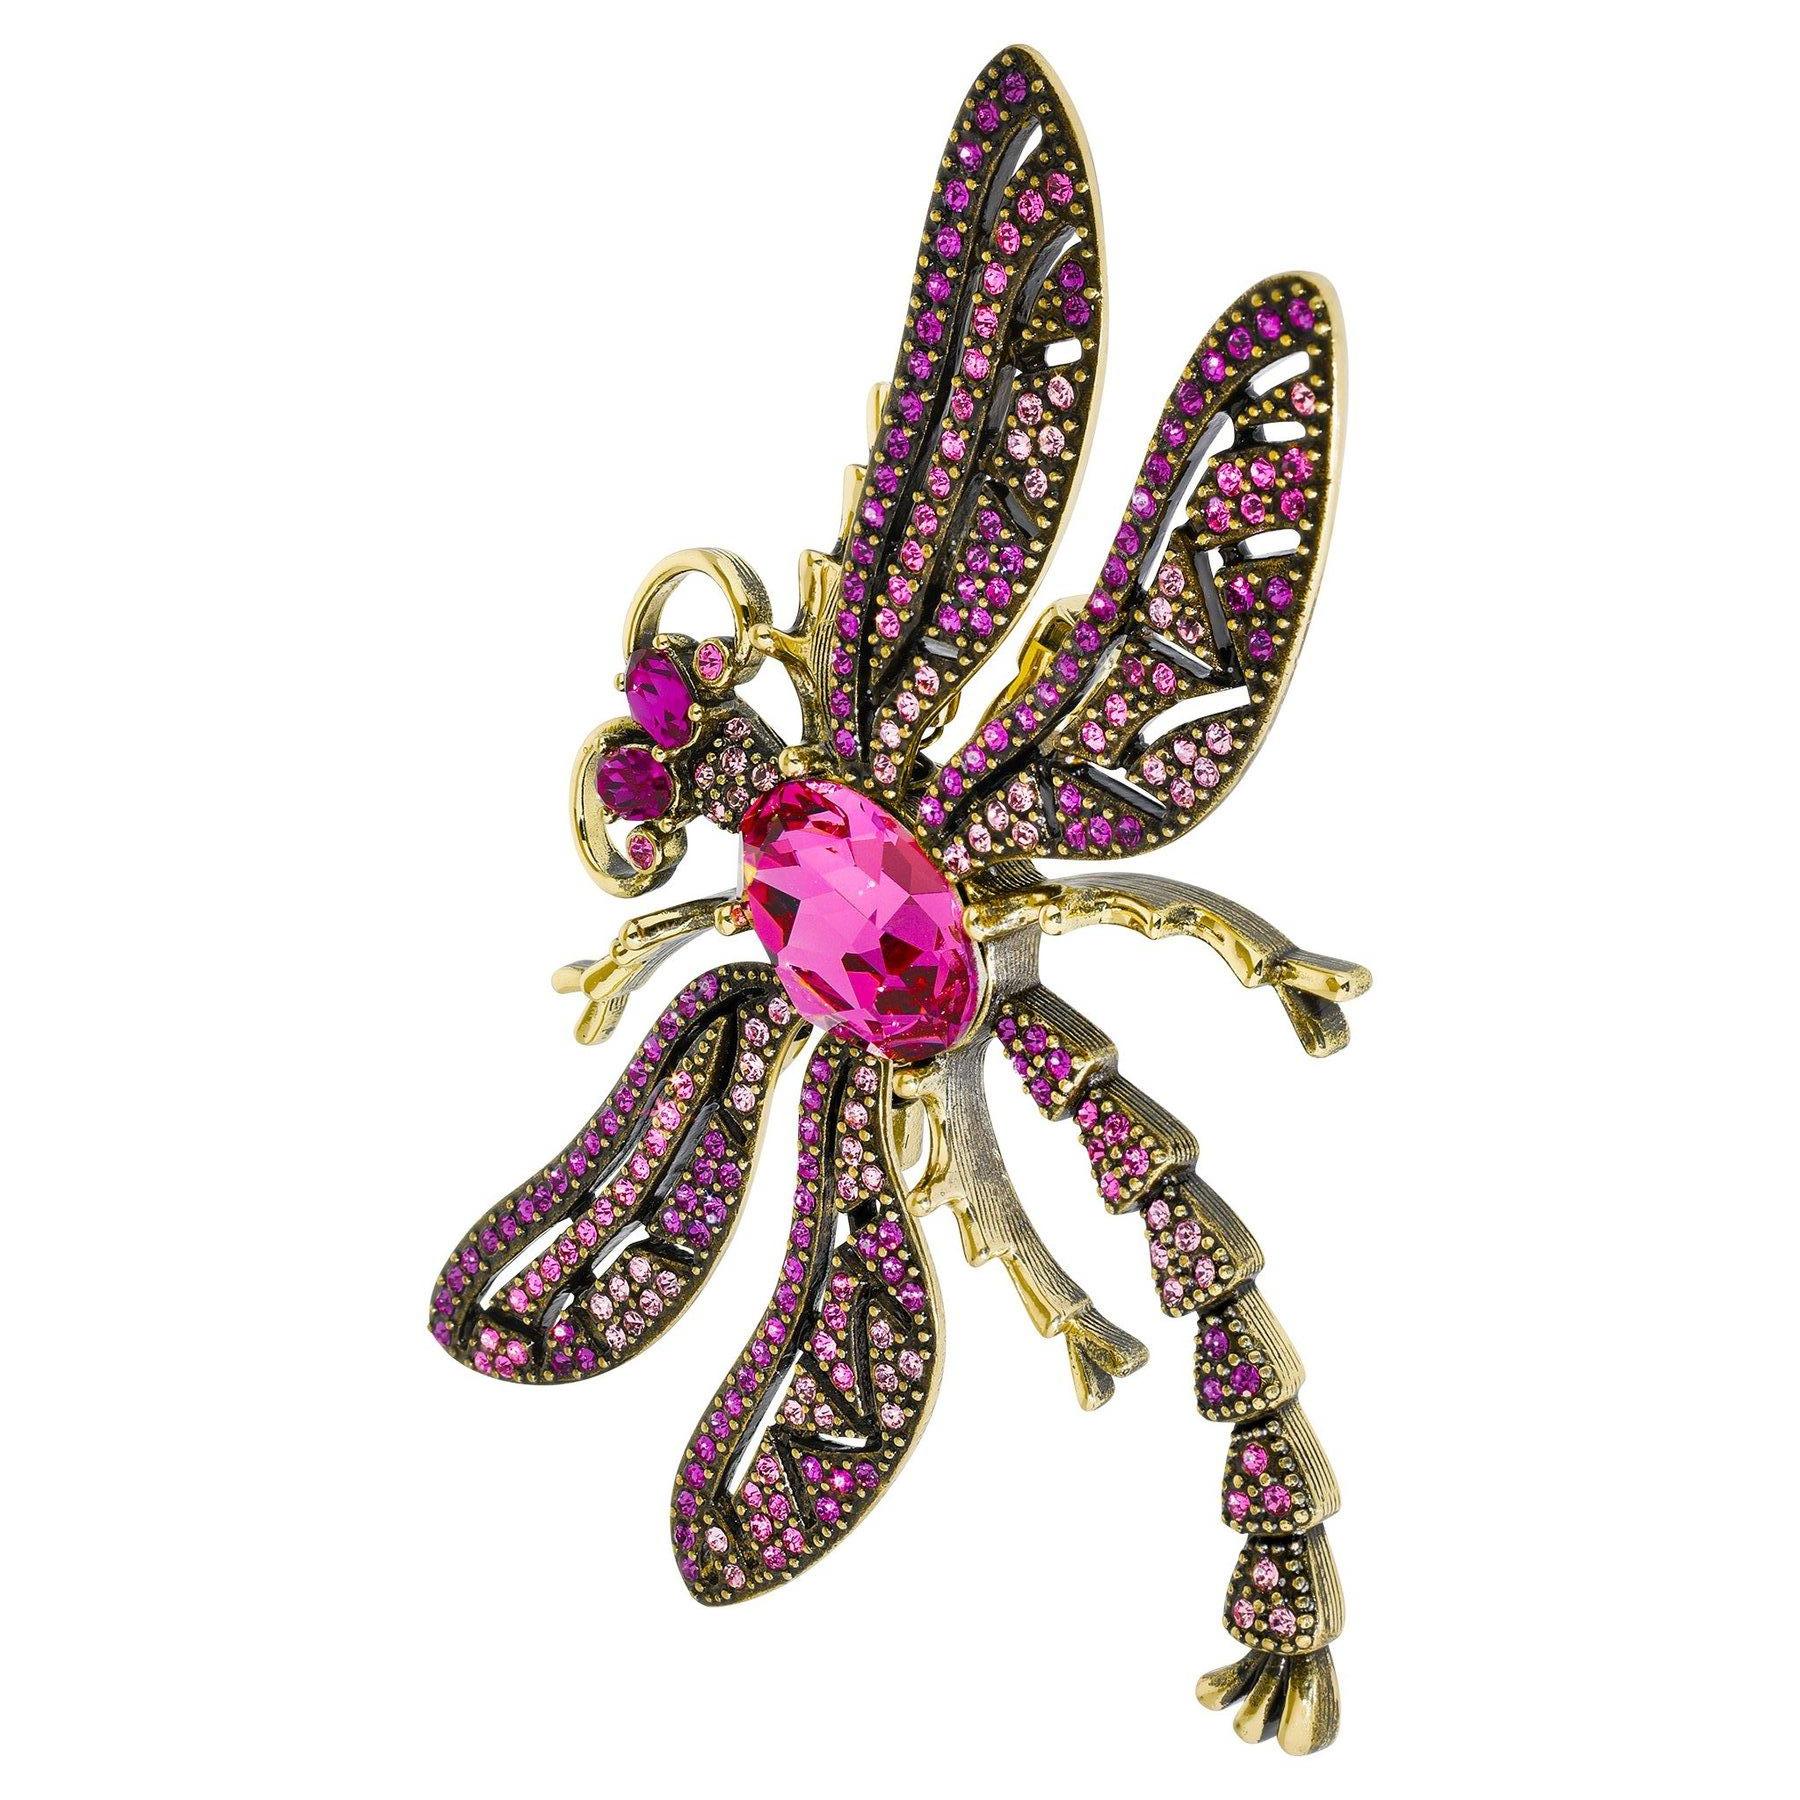 Heidi Daus Trembling Brilliance Crystal Accented Dragonfly Pin Fushia Pink Multi For Sale 1